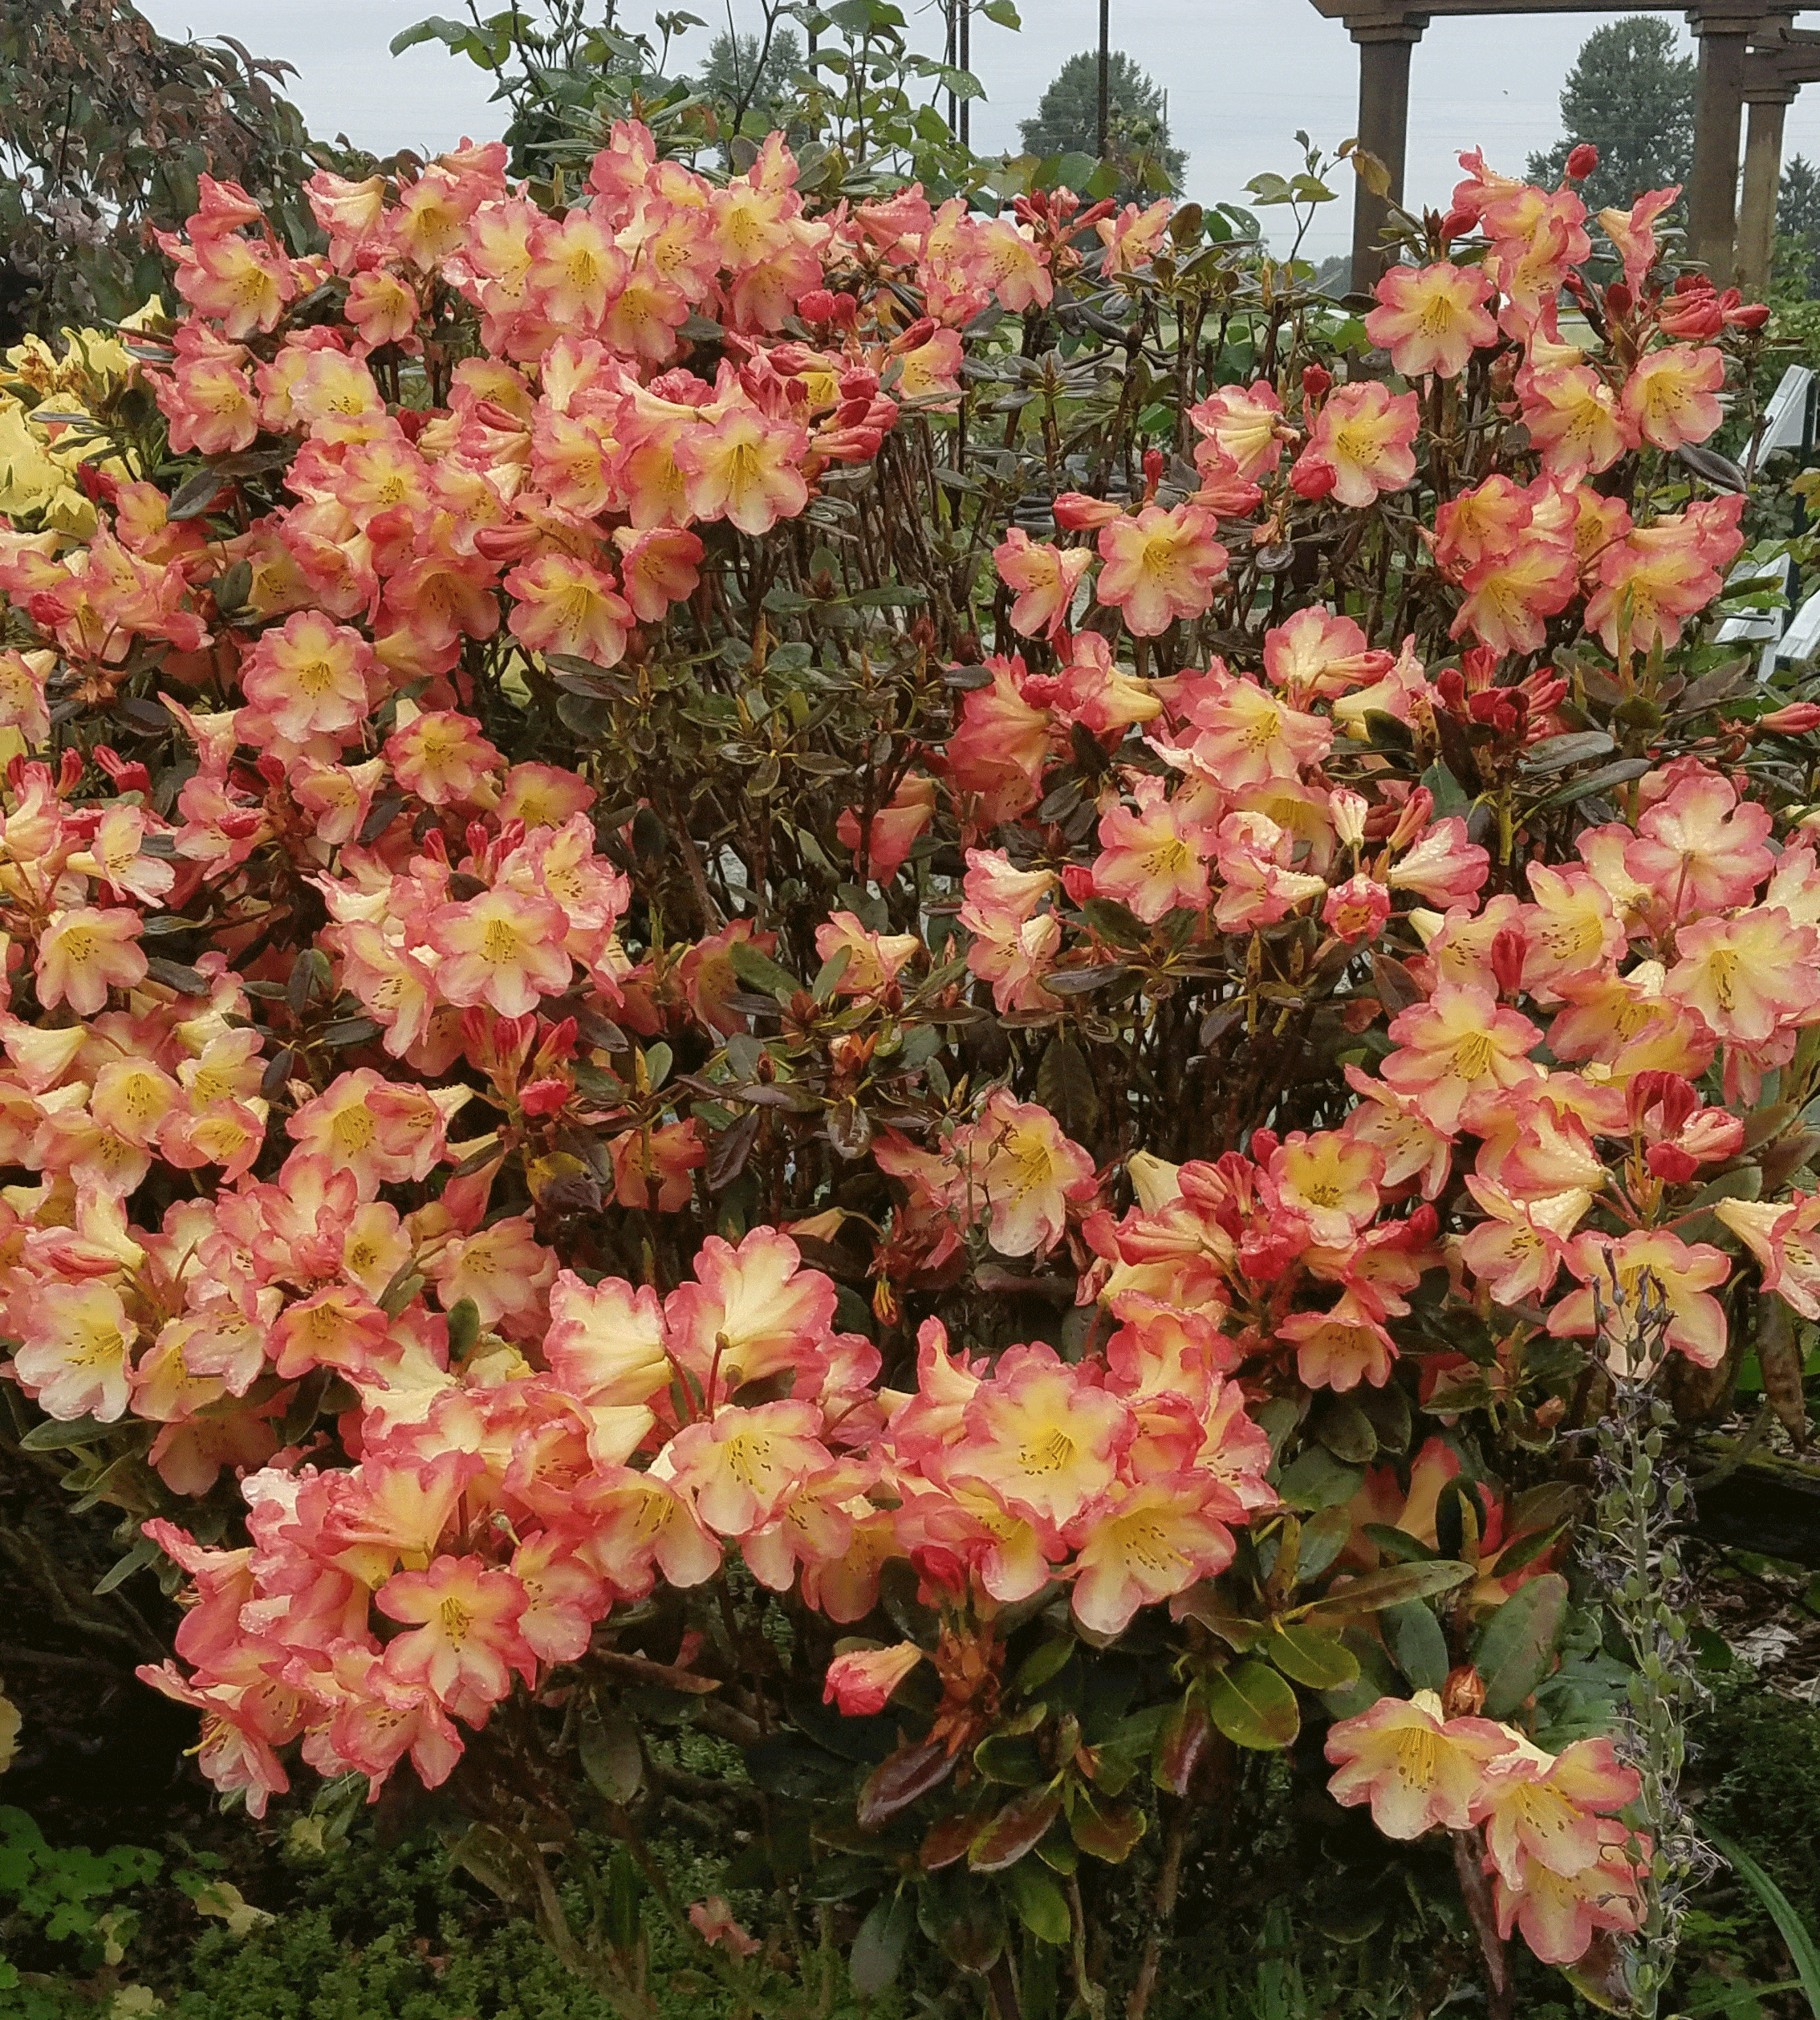 Rhododendron 'Ring of Fire' blooming in May is always an attention getter.